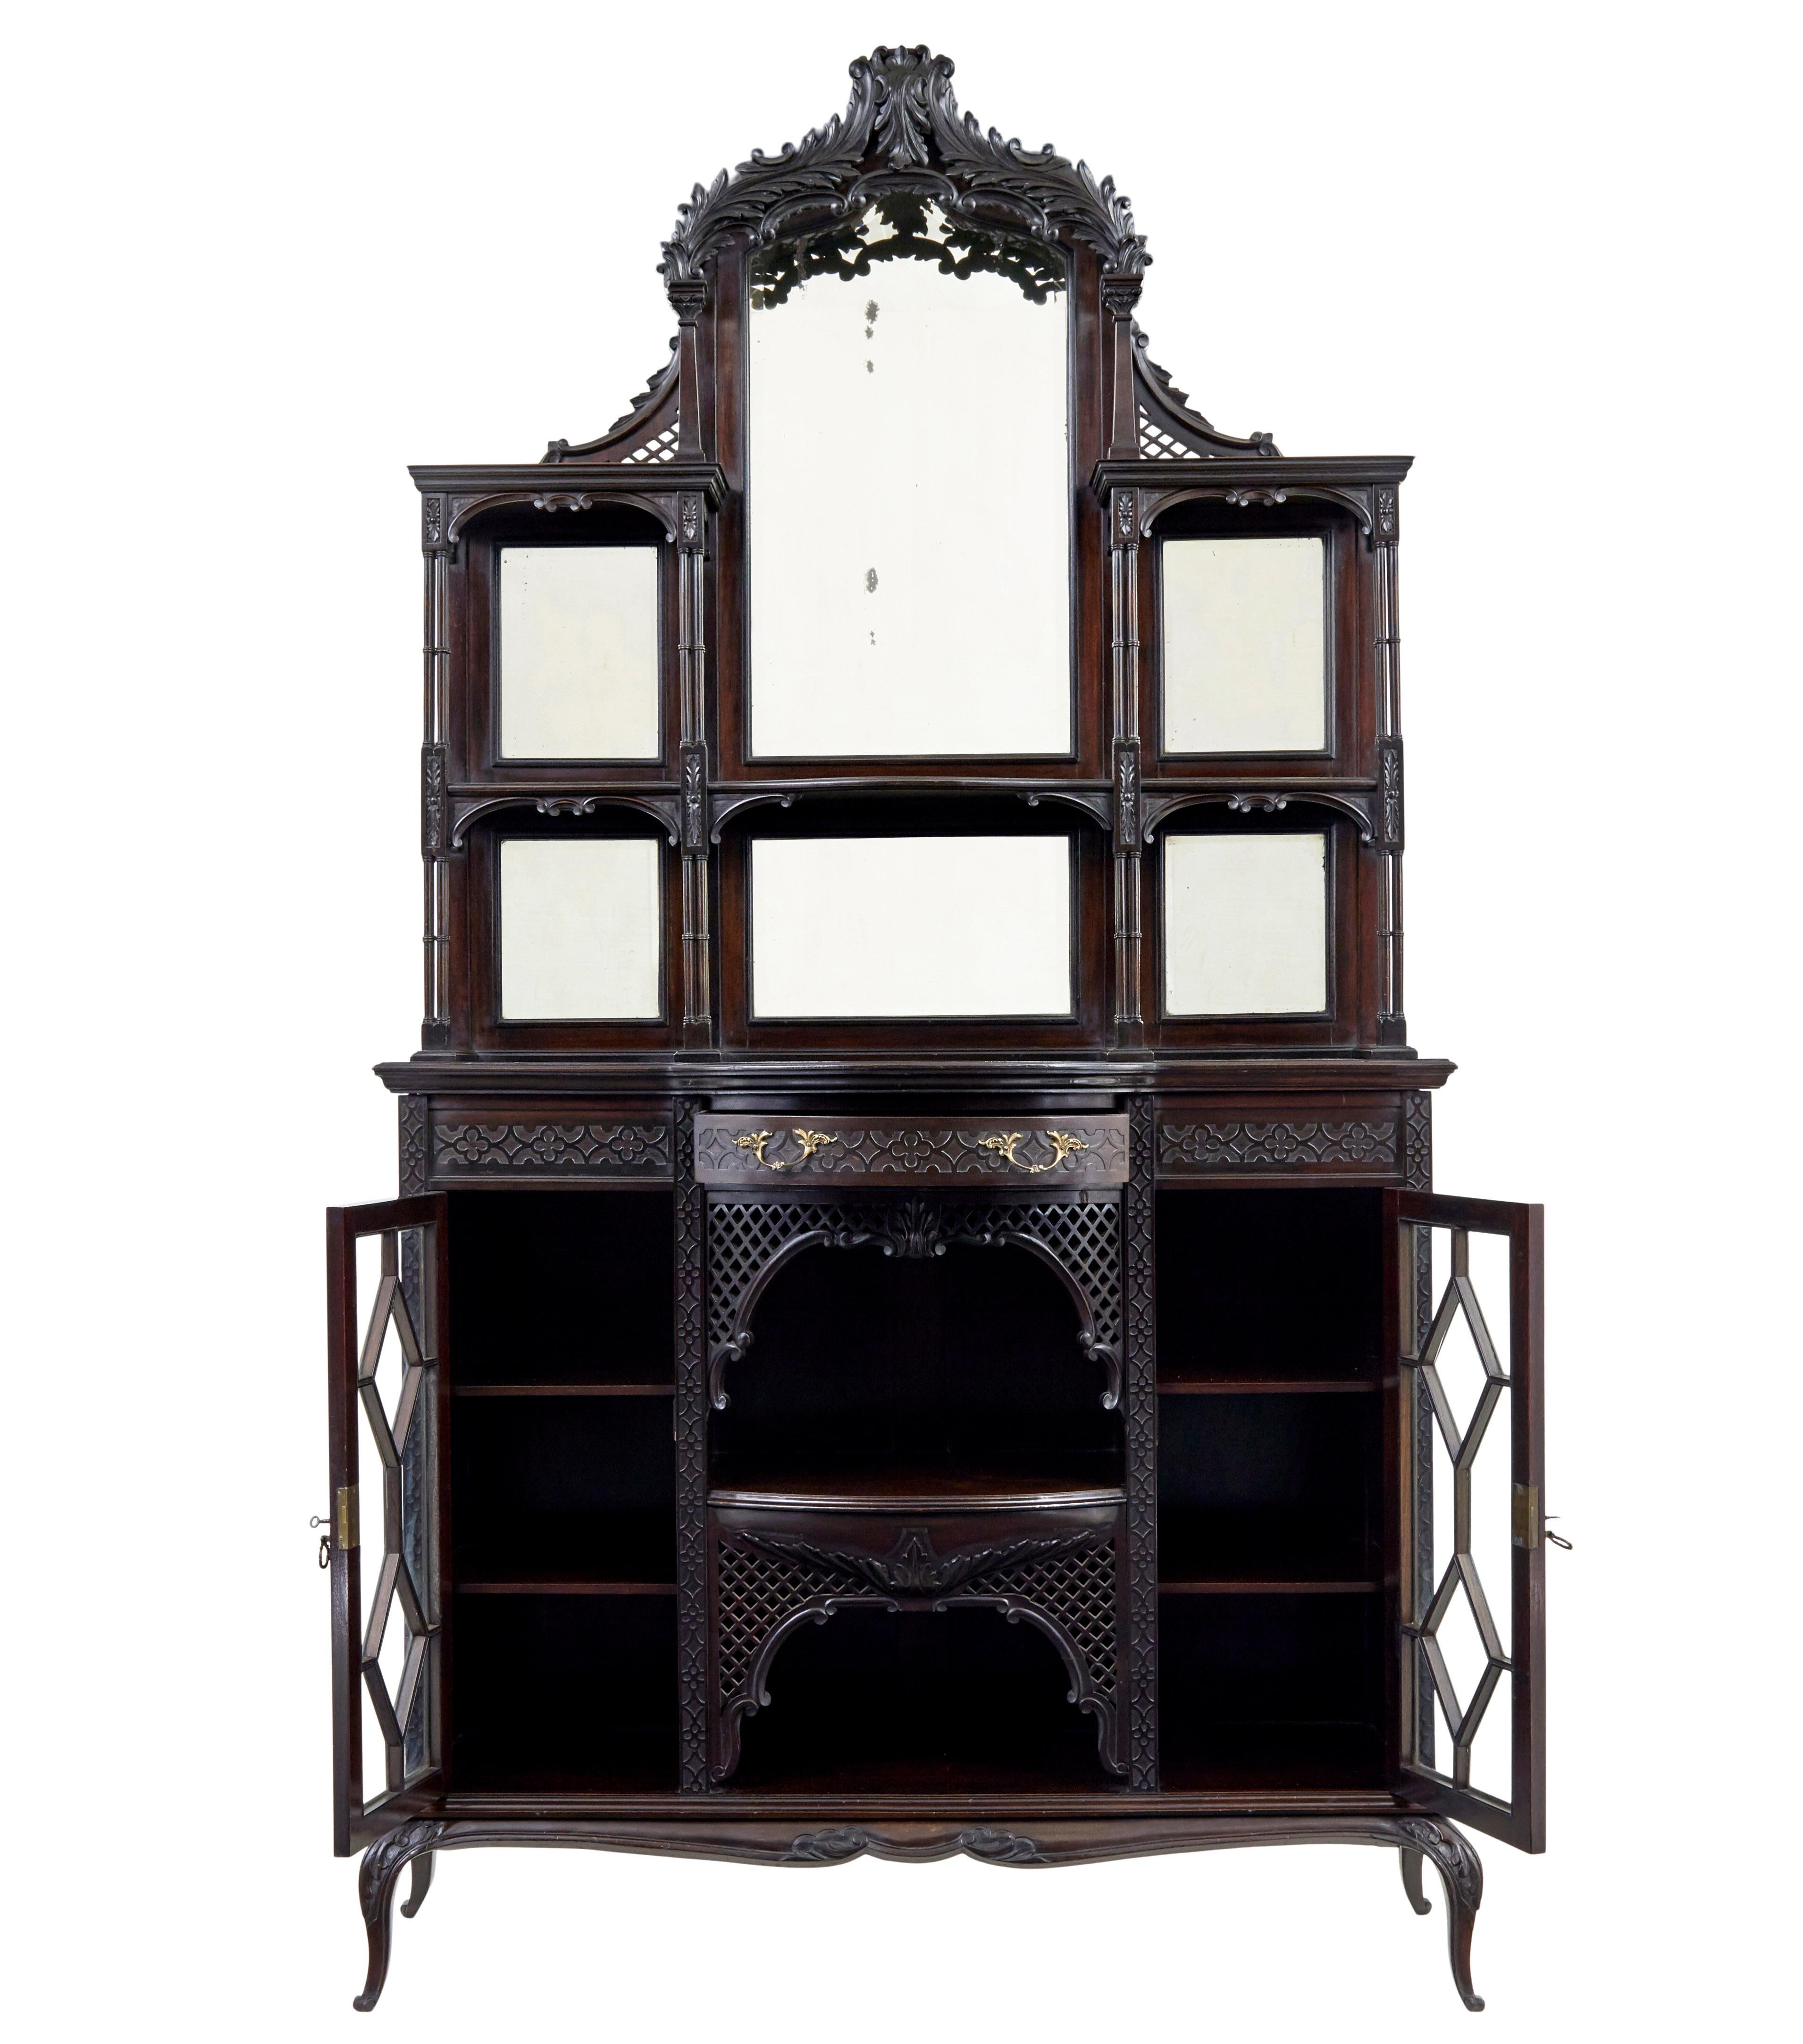 Edwardian Chinese chippendale carved mahogany cabinet, circa 1905.

2 part Edwardian mirrored cabinet in the chippendale taste. Top section comprising of 6 mirrors surmounted by carved latice canopy. Tiers linked together by quad turned columns.